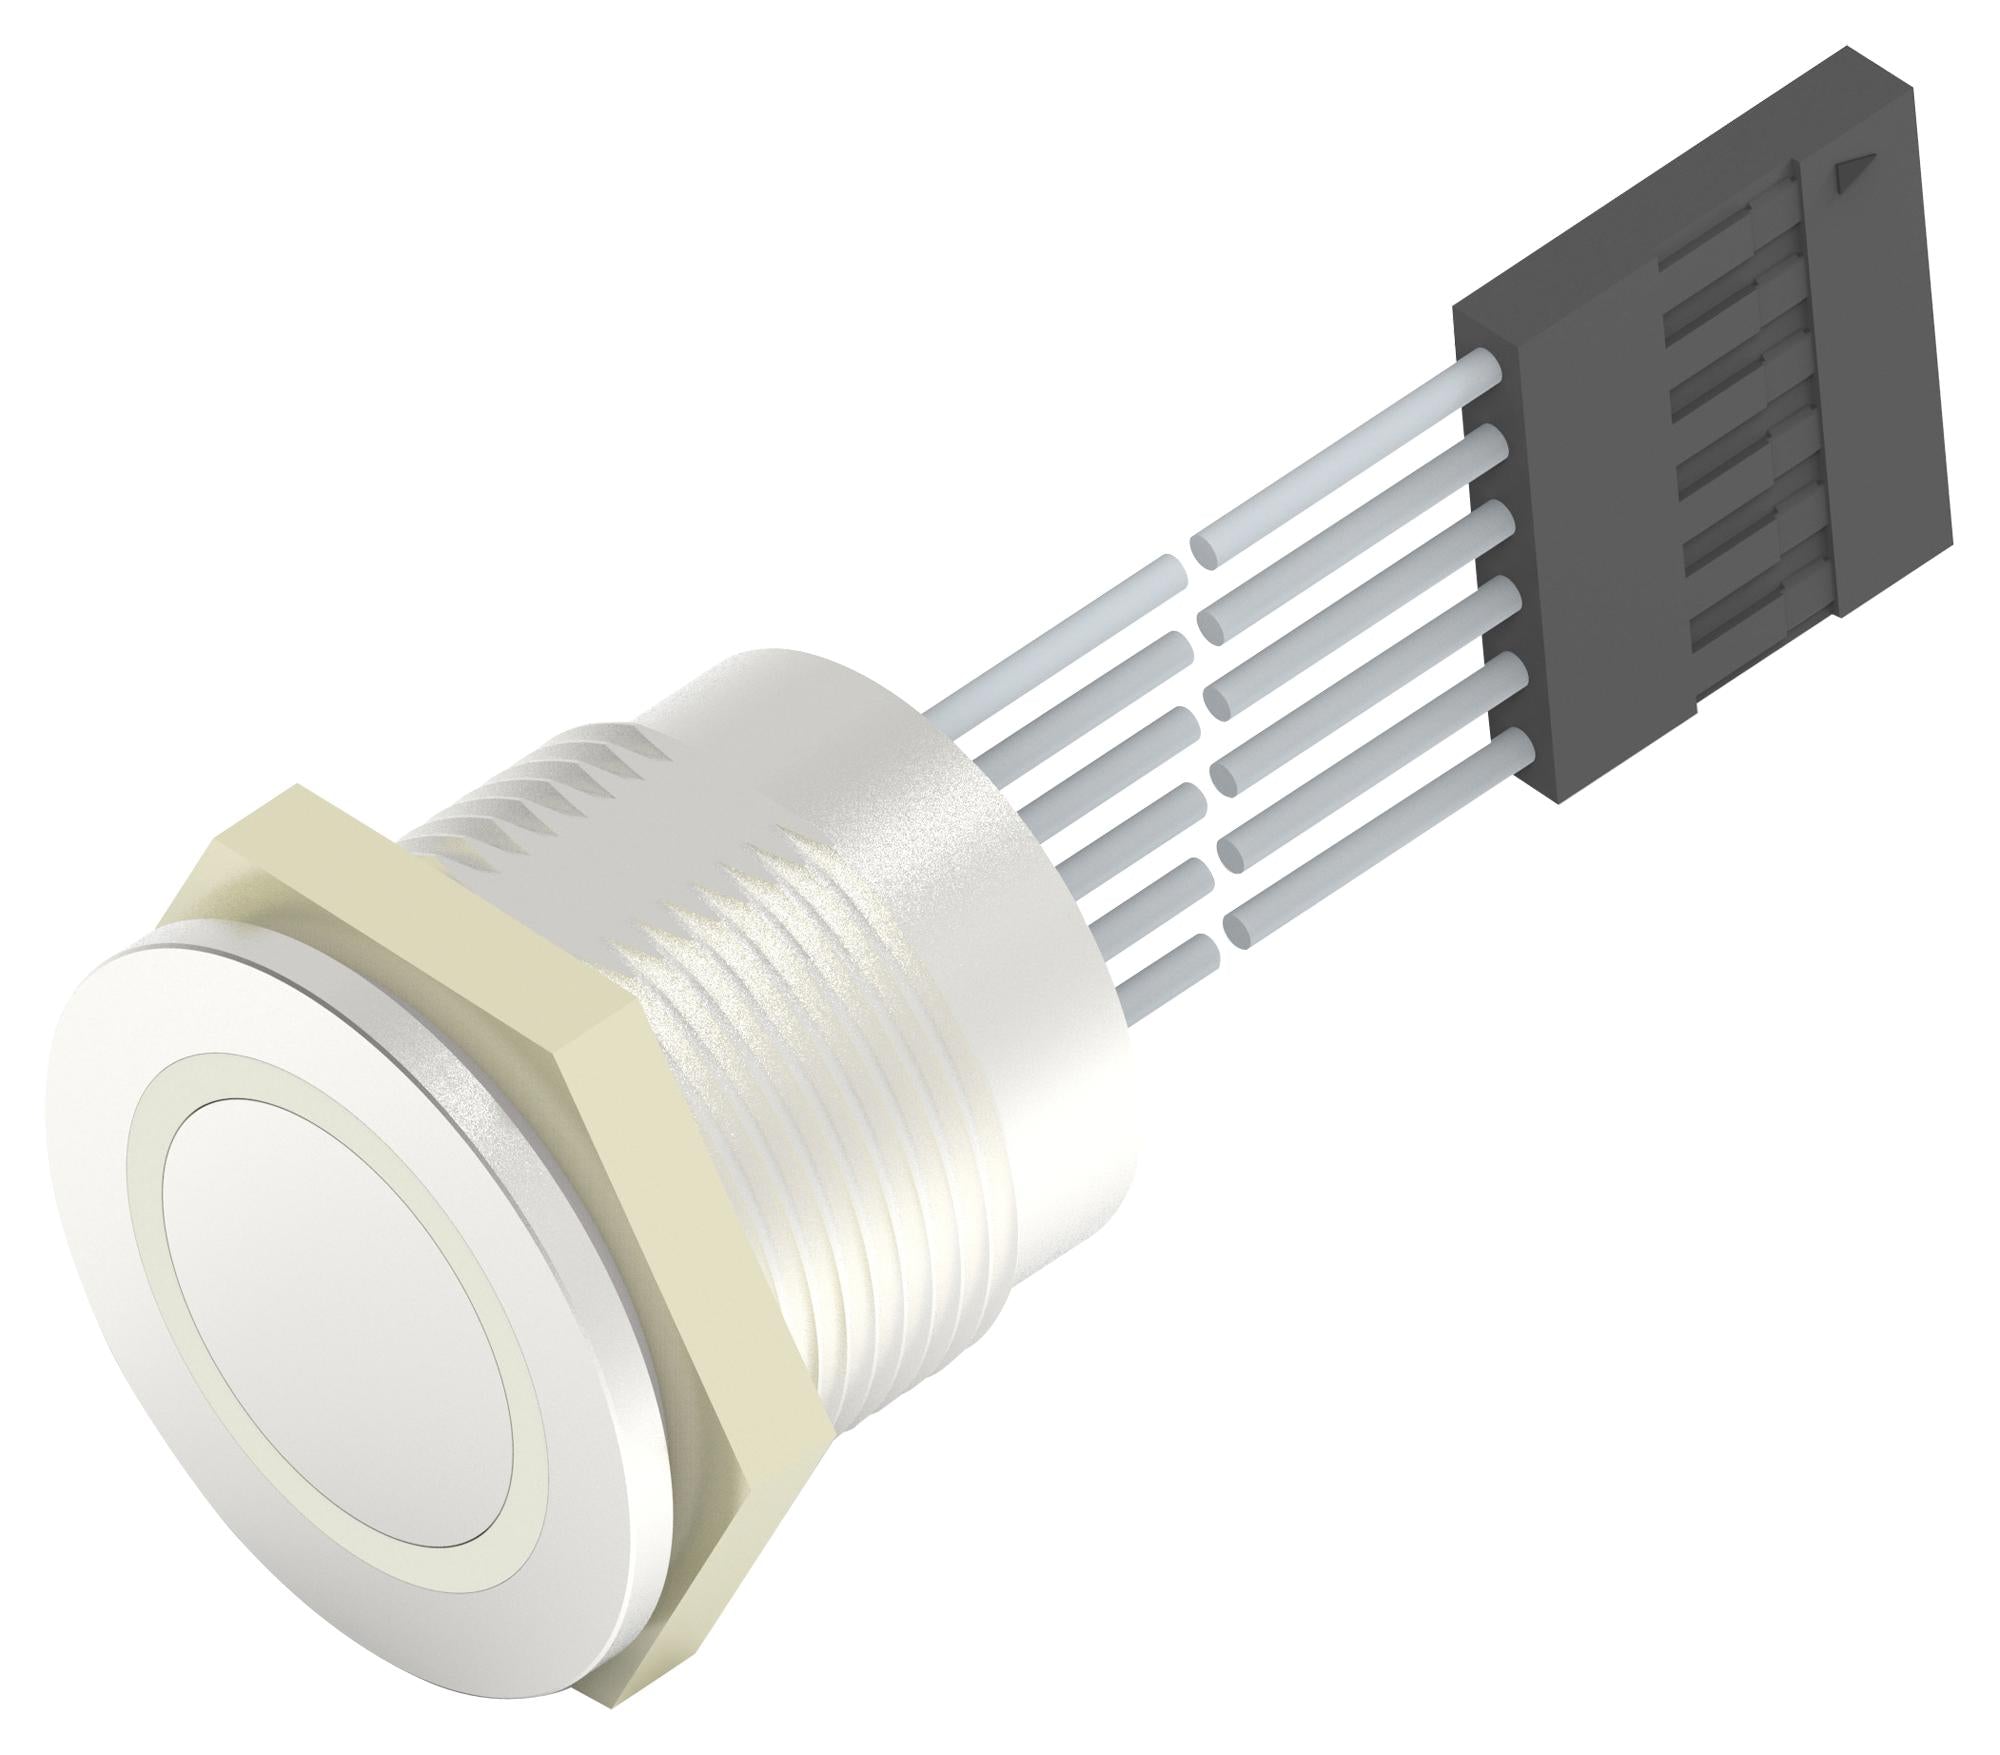 AVP19MAIOFE0DT5A04 VANDAL RESISTANT SW, SPST, 1A, 24V, PANL ALCOSWITCH - TE CONNECTIVITY